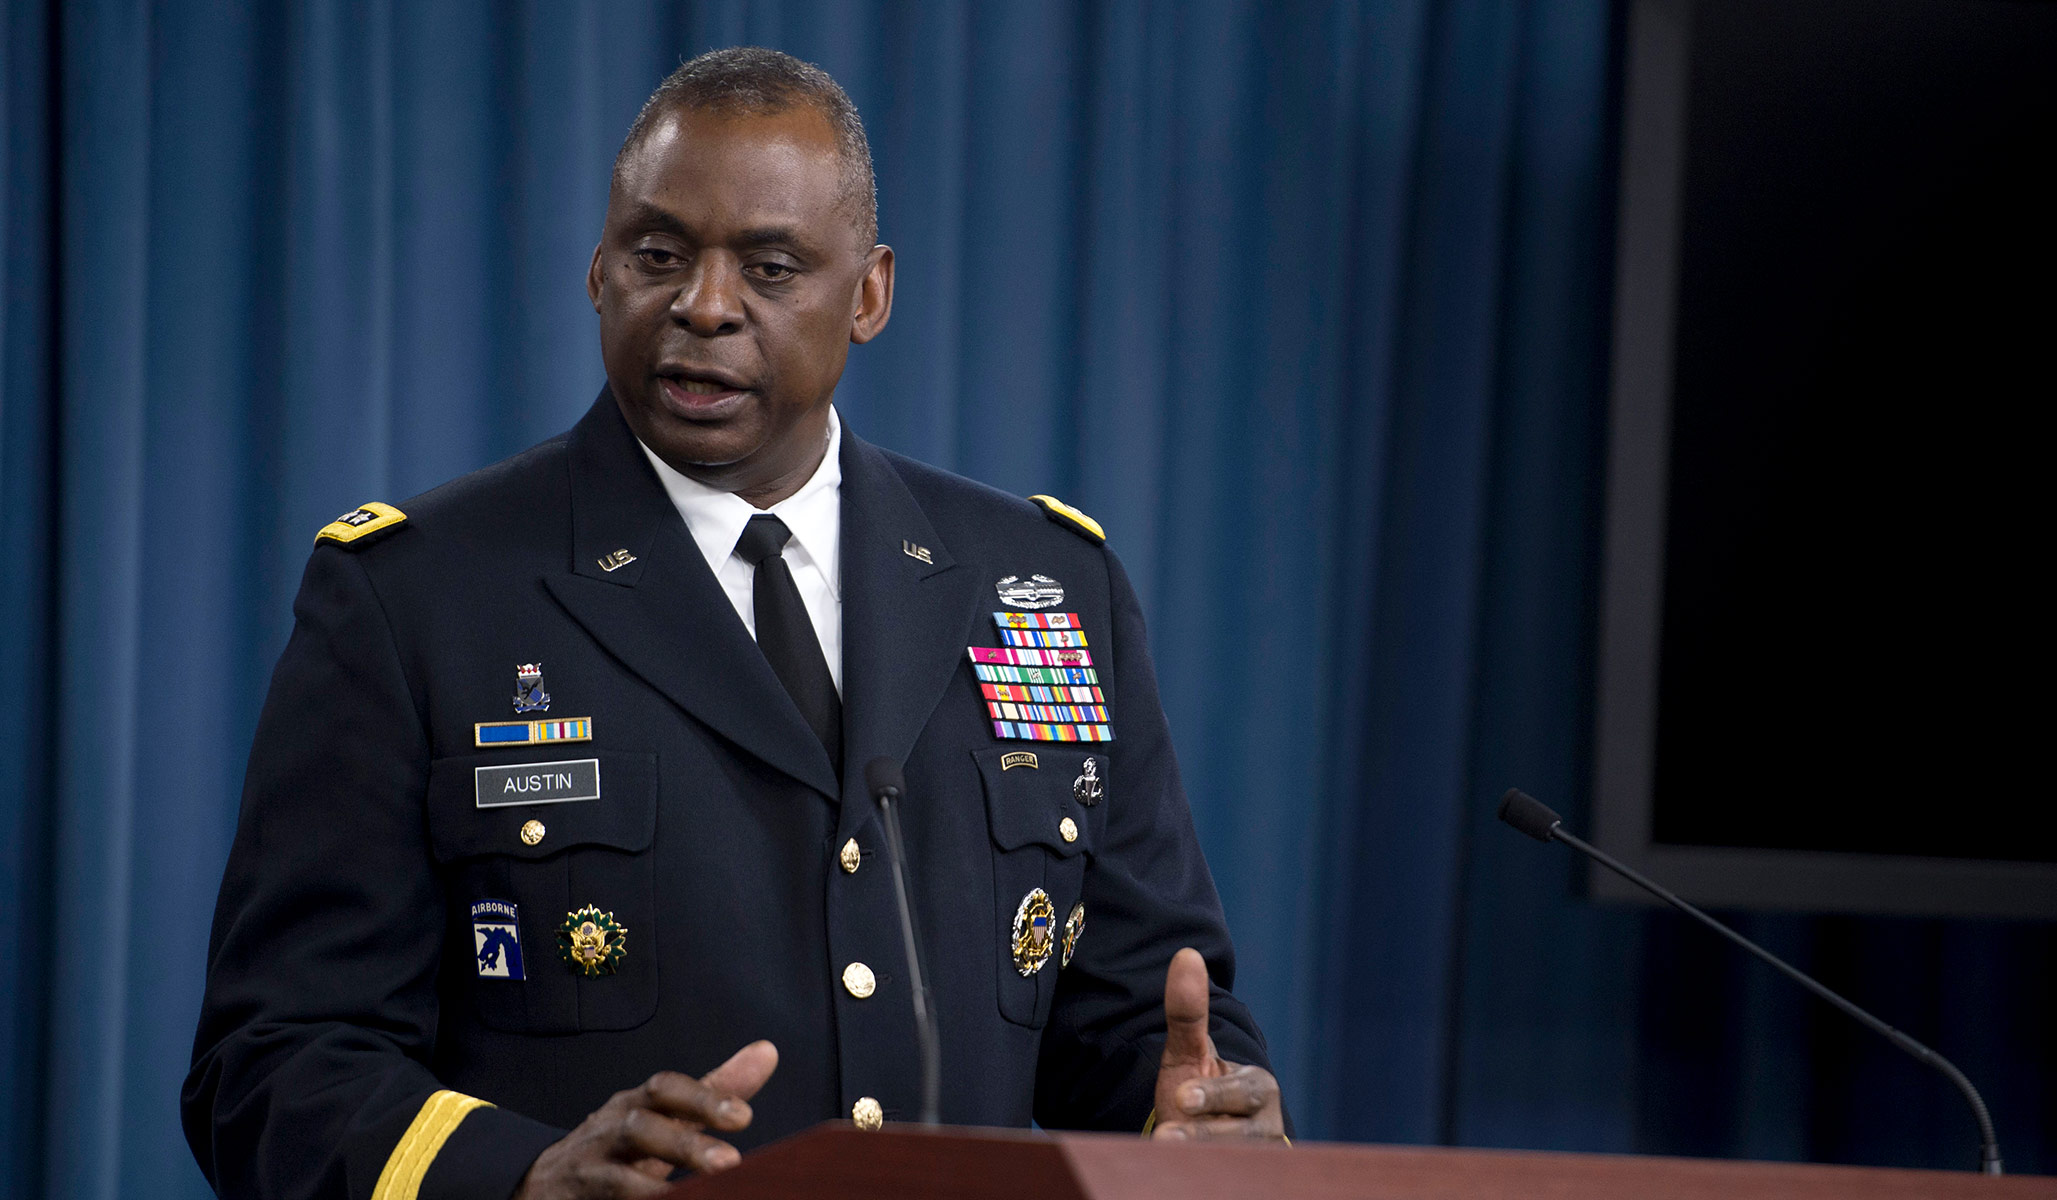 Biden To Tap Army General Lloyd Austin For Secretary Of Defense National Review